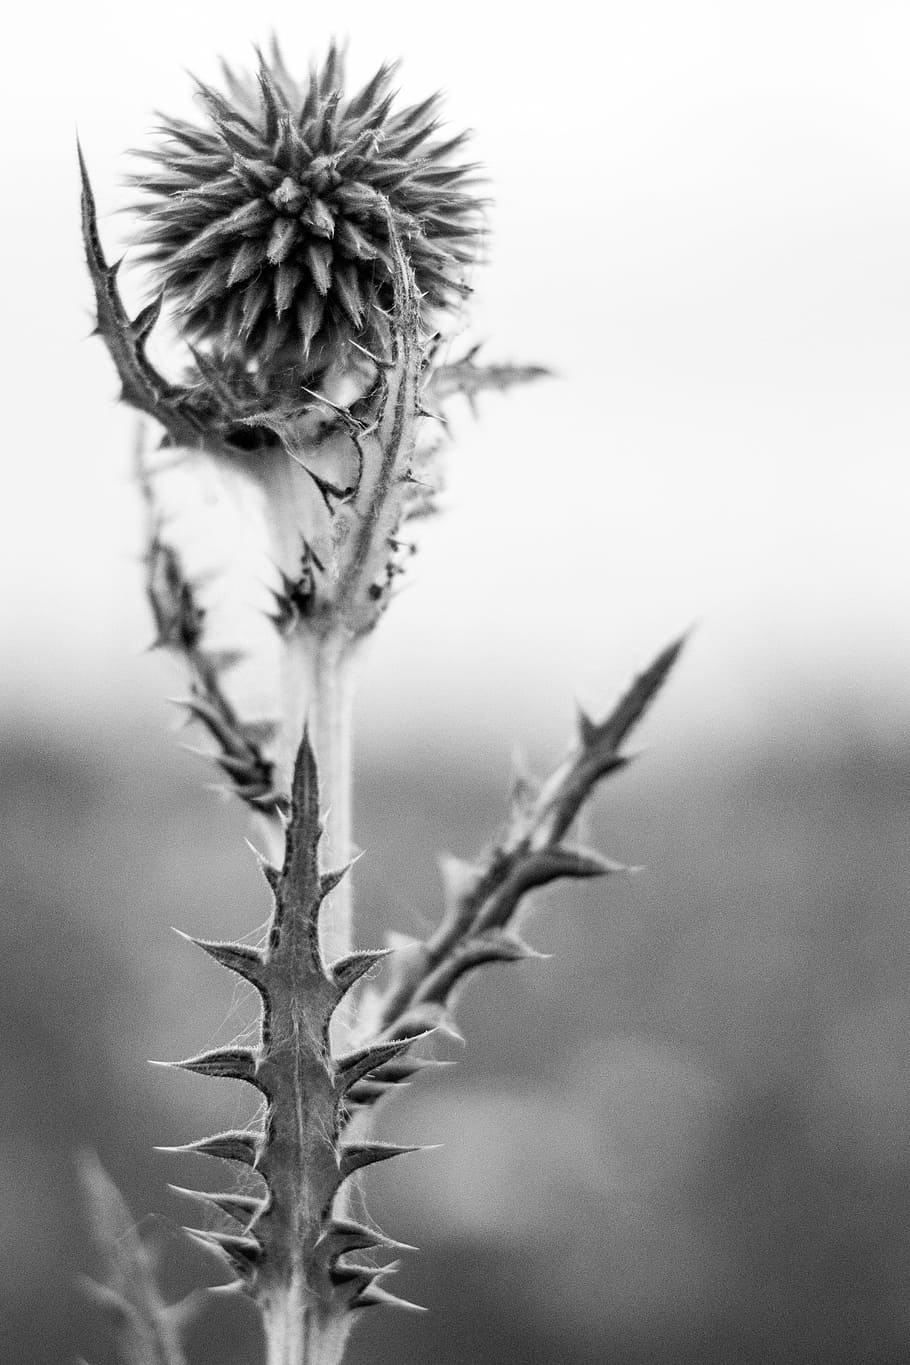 bw, flower, barb, needles, scratchy, nature, plant, close-up, growth, focus on foreground